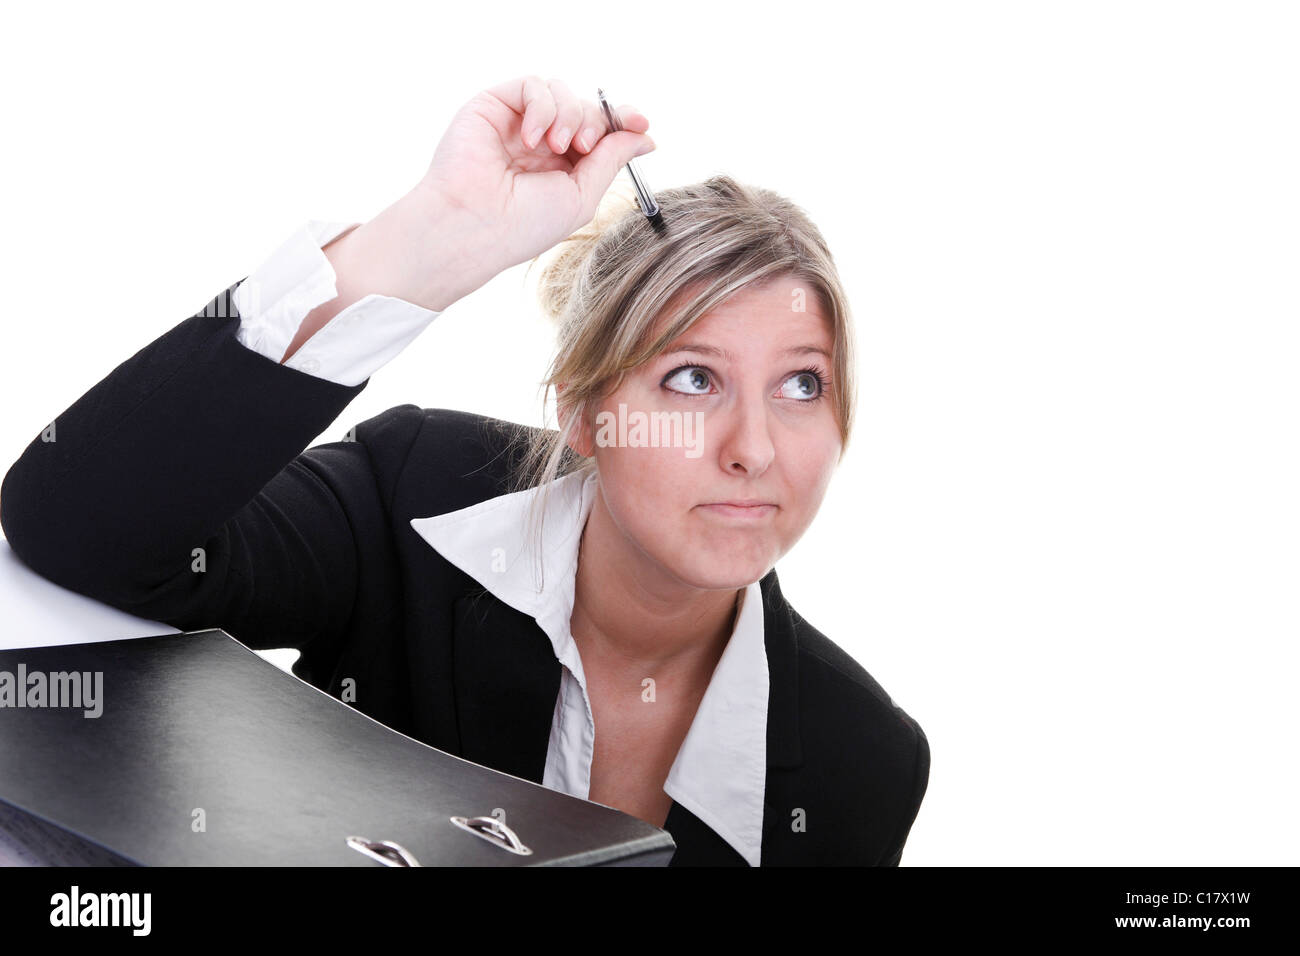 Woman wearing a costume in the office, pensive Stock Photo